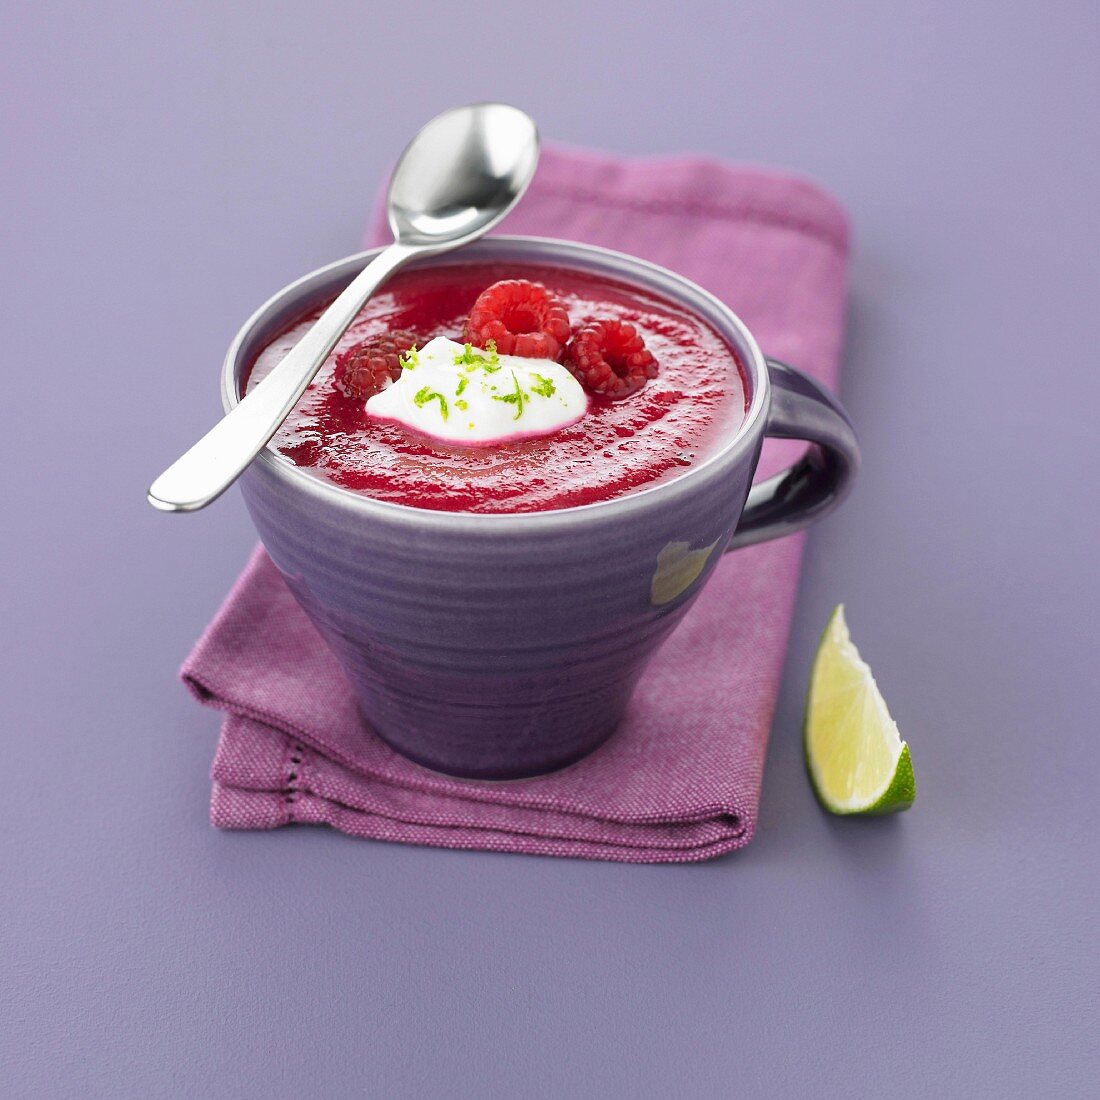 Cold beetroot soup with raspberries and lime cream